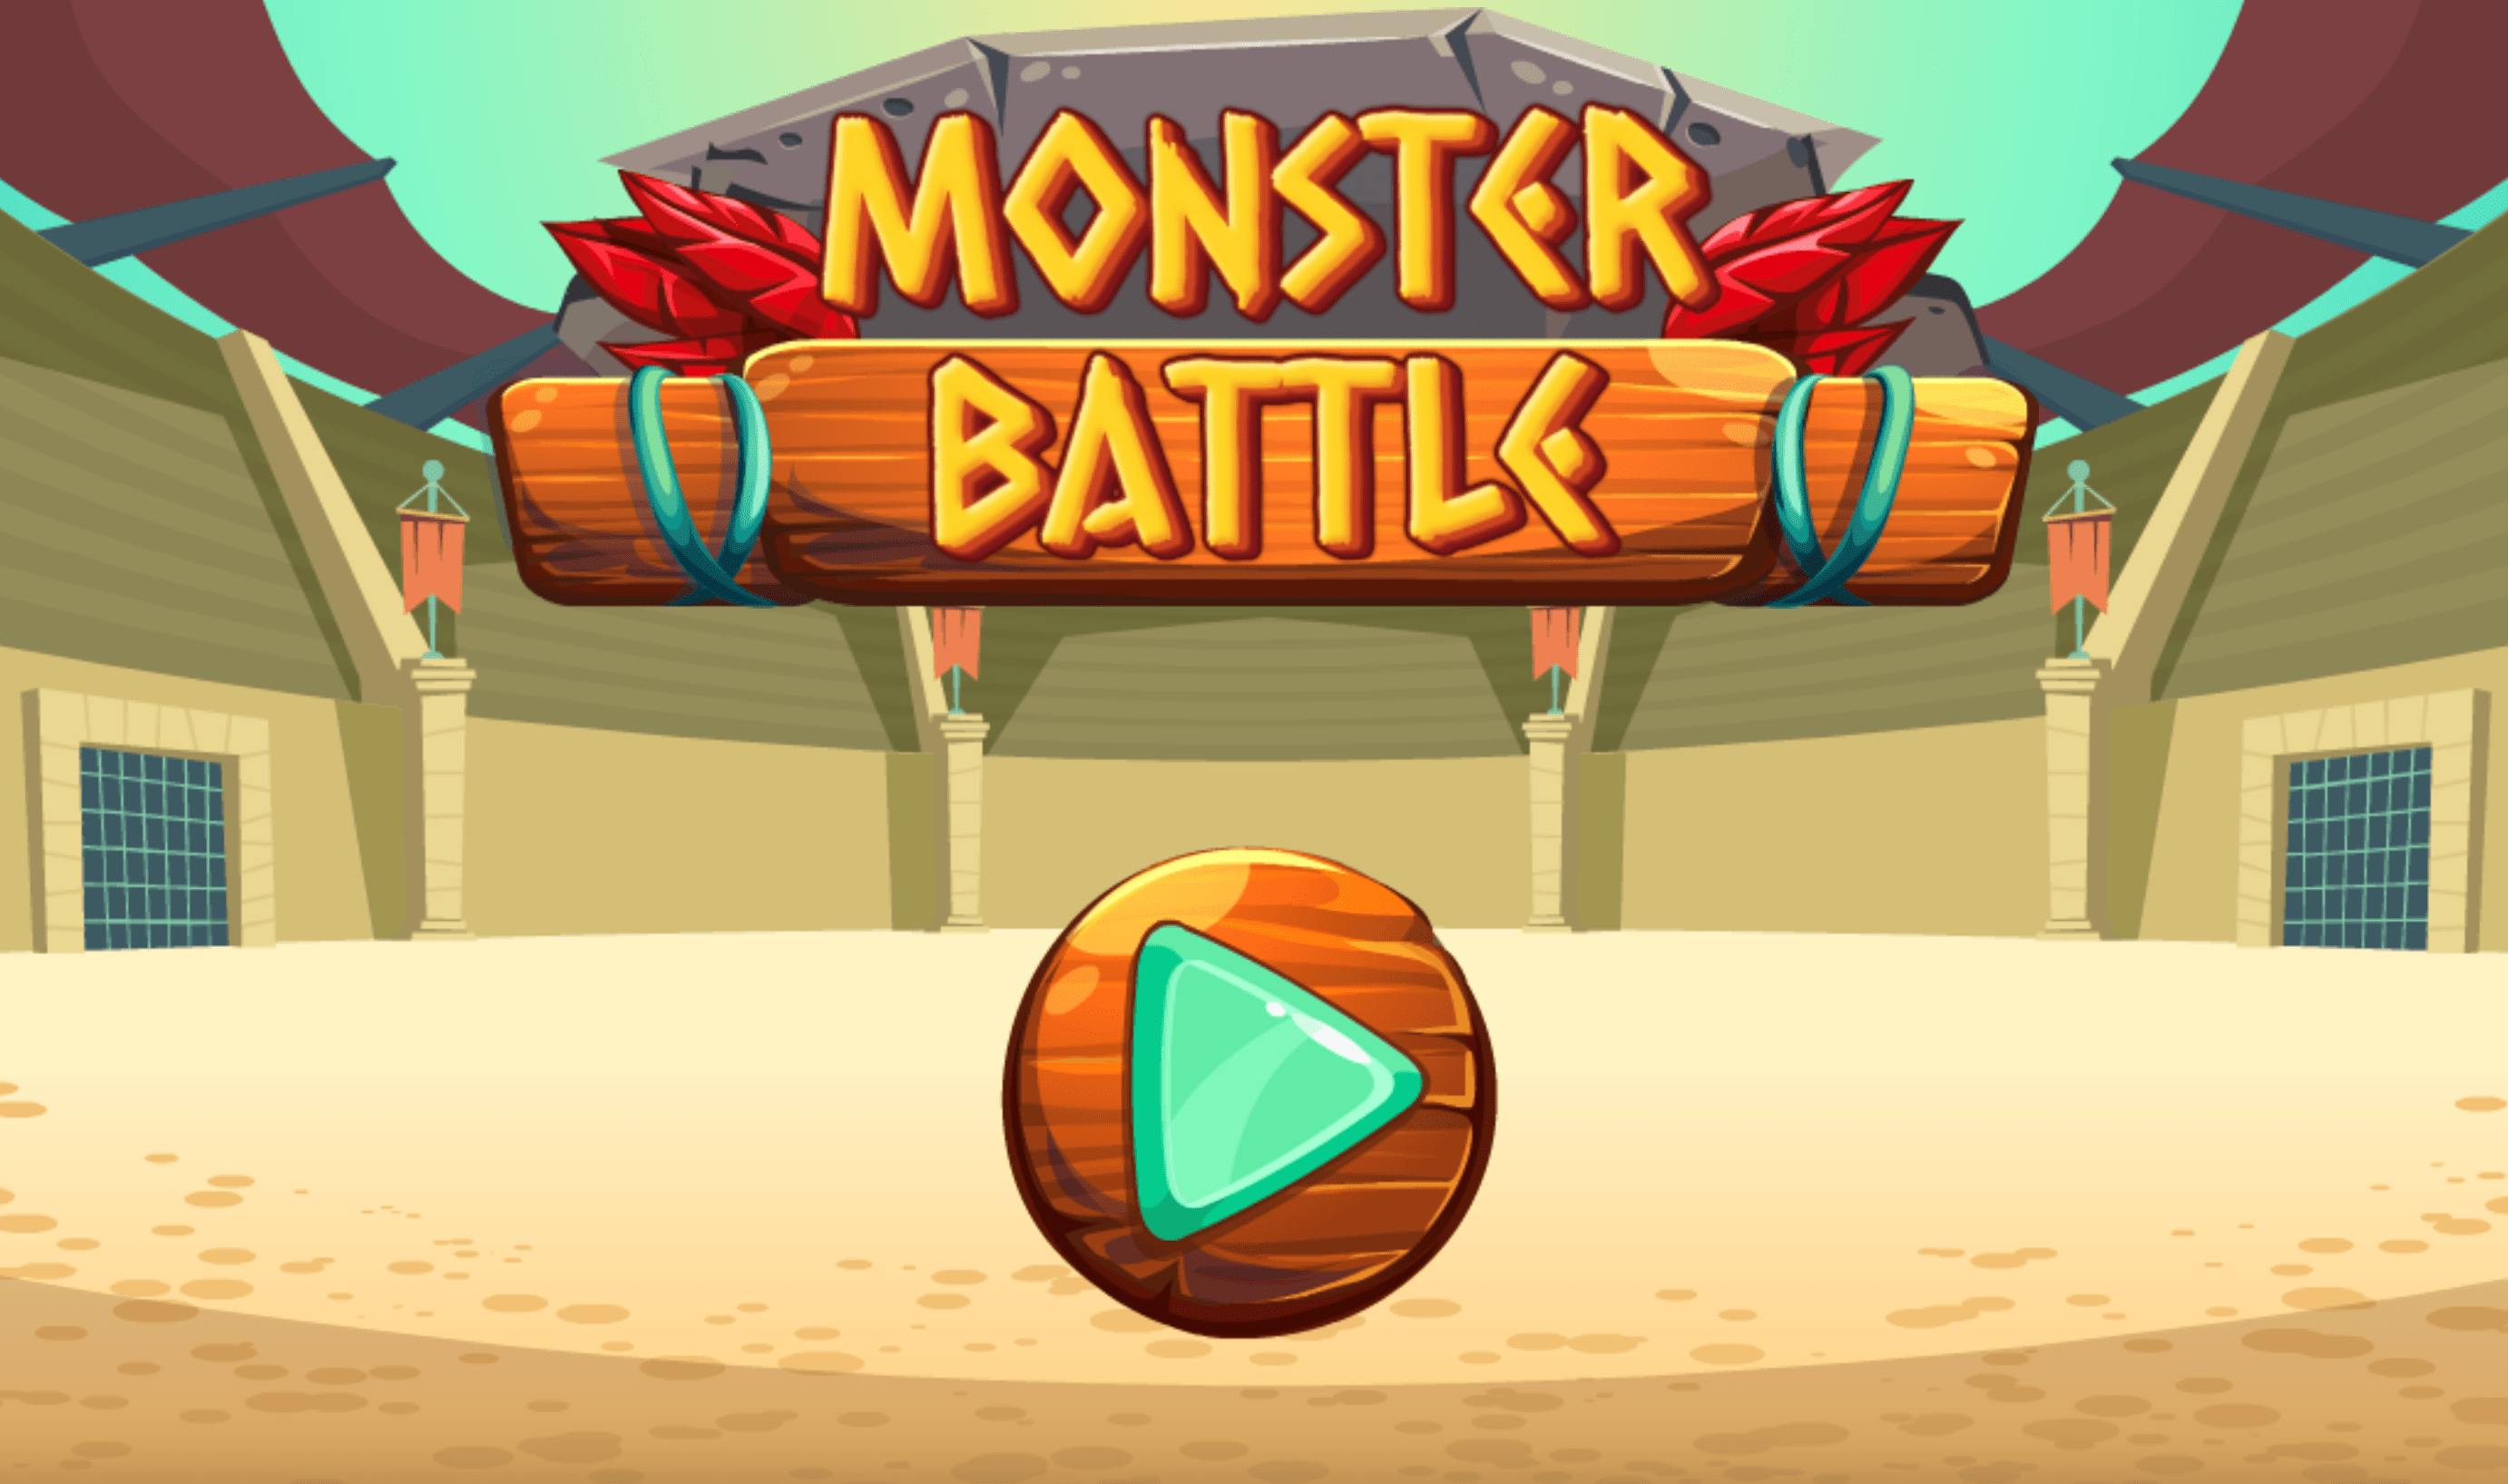 Title screen of a game featuring an arena setting and a play button.